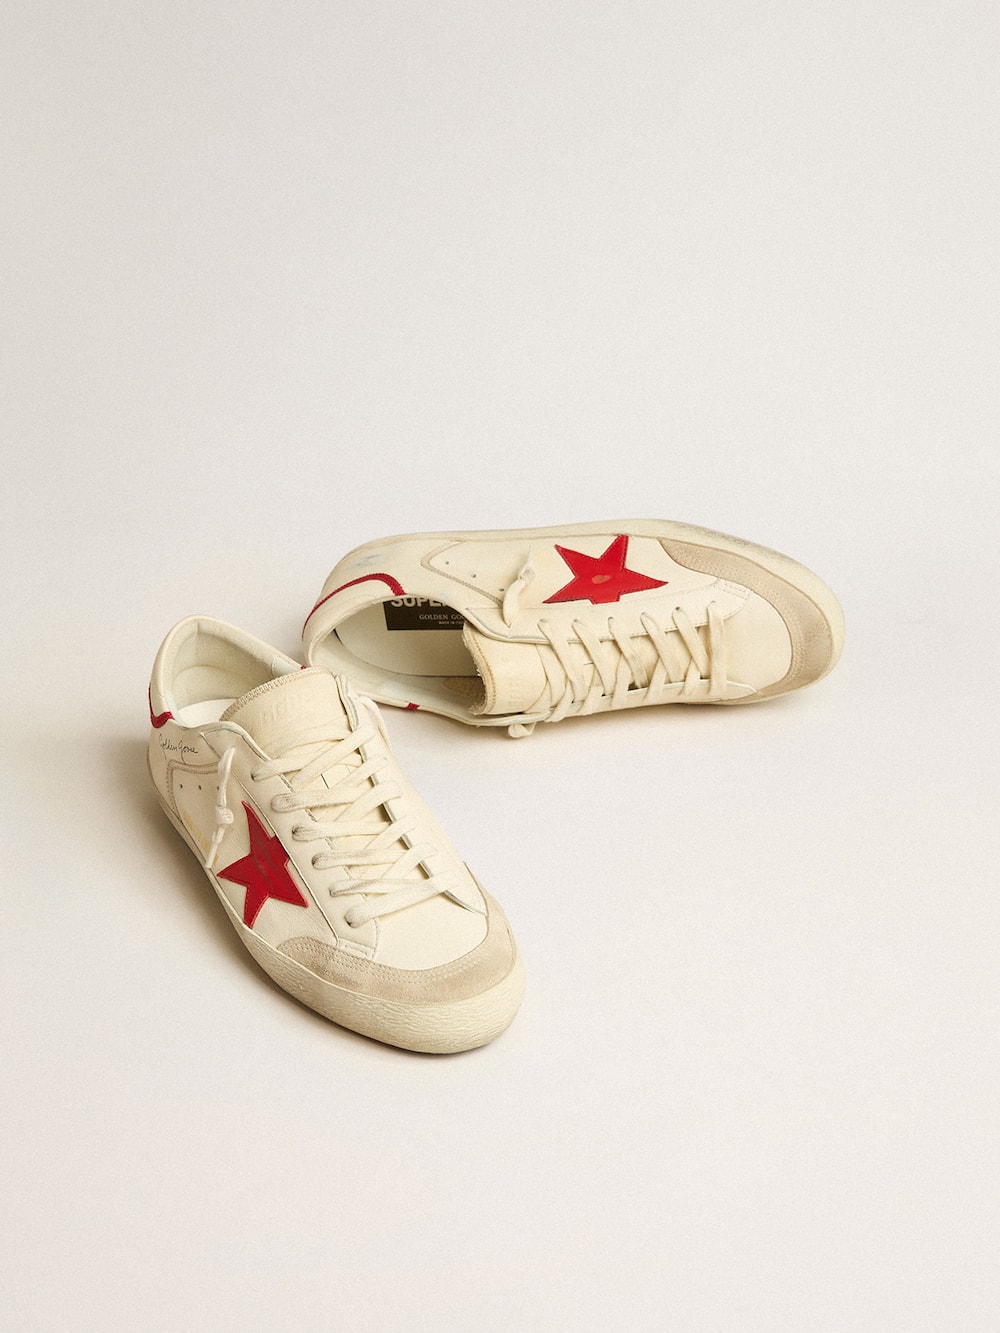 Golden Goose - Men's Super-Star LTD in nappa with red leather star and pearl suede toe in 